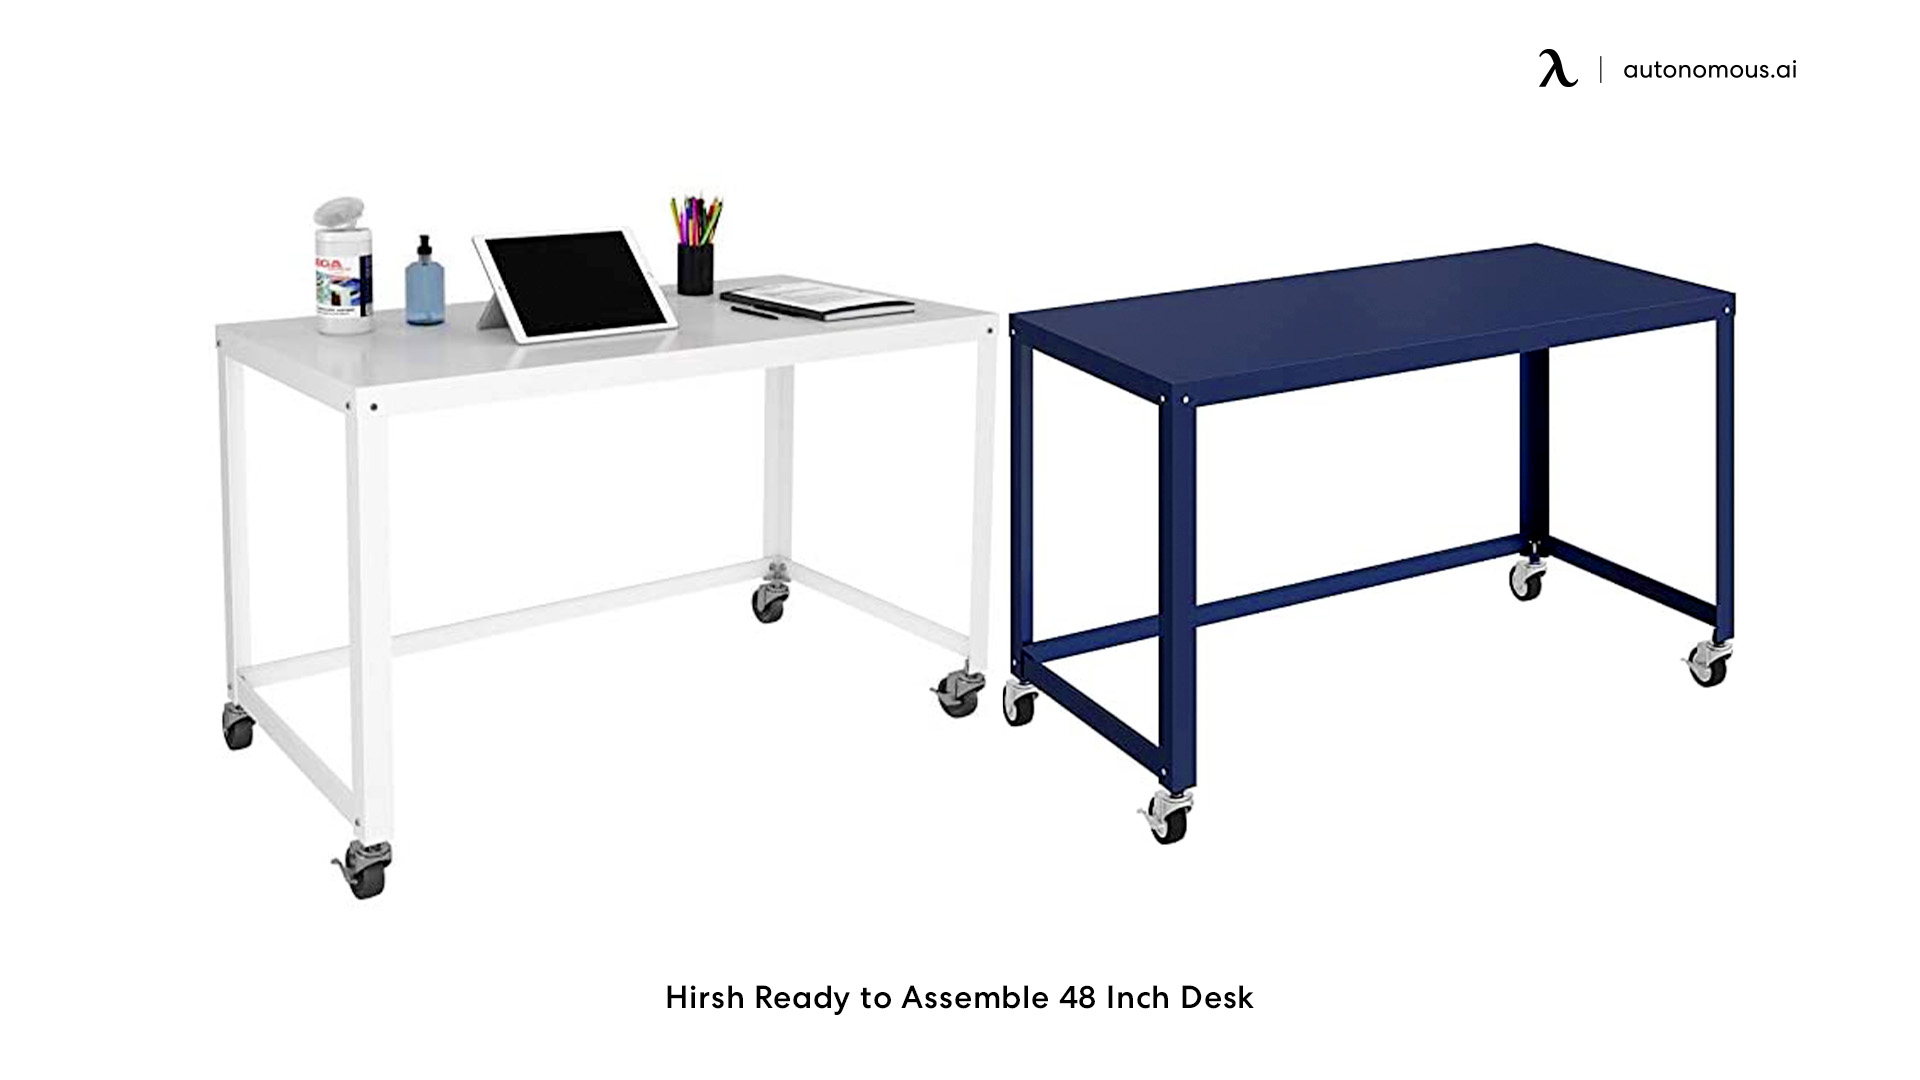 Hirsh Ready to Assemble 48 Inch Desk